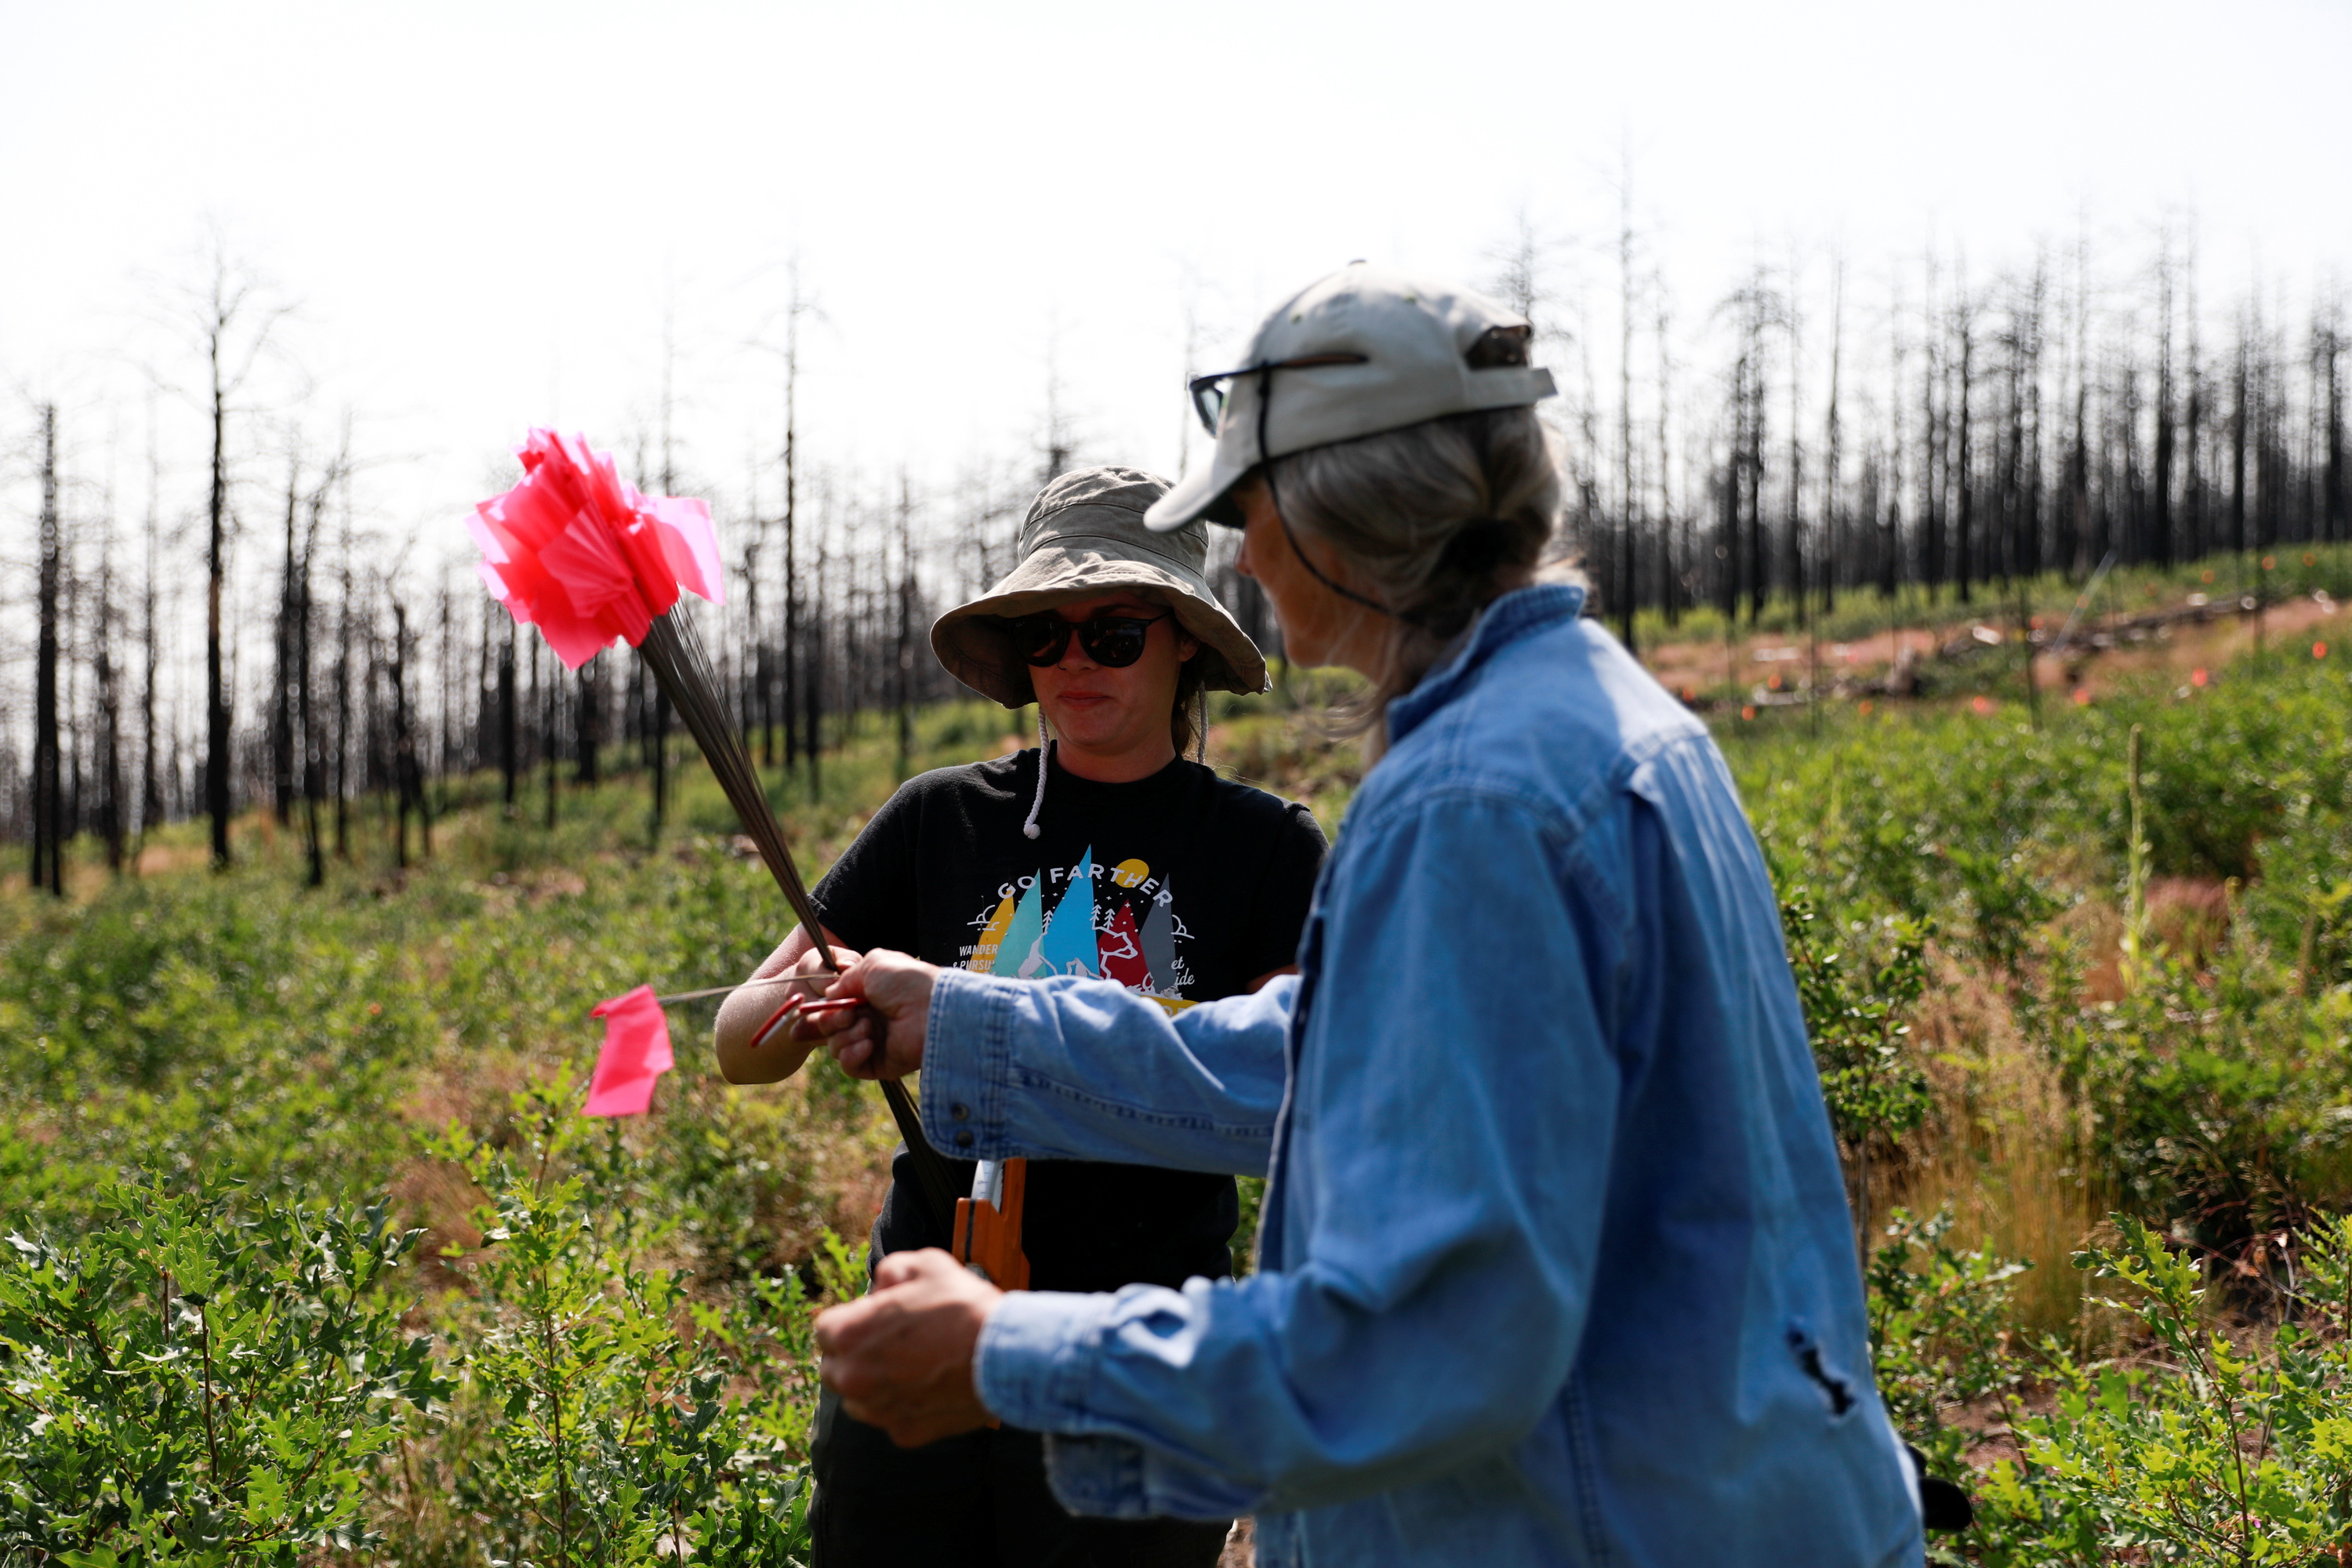 As fires devastate U.S. forests, researchers work to grow super-resilient saplings